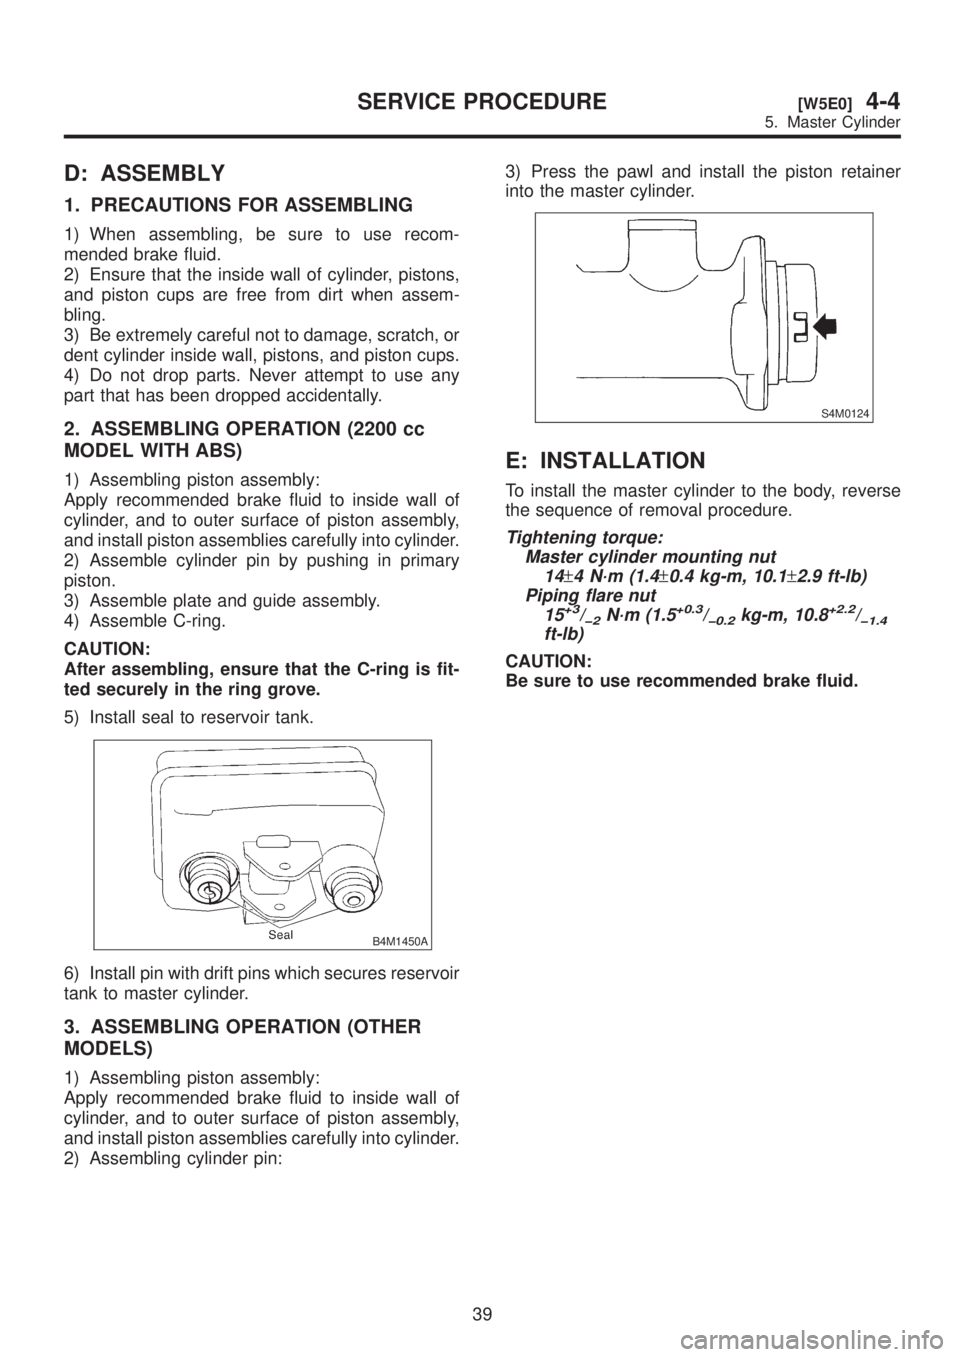 SUBARU LEGACY 1999  Service Owners Guide D: ASSEMBLY
1. PRECAUTIONS FOR ASSEMBLING
1) When assembling, be sure to use recom-
mended brake fluid.
2) Ensure that the inside wall of cylinder, pistons,
and piston cups are free from dirt when ass